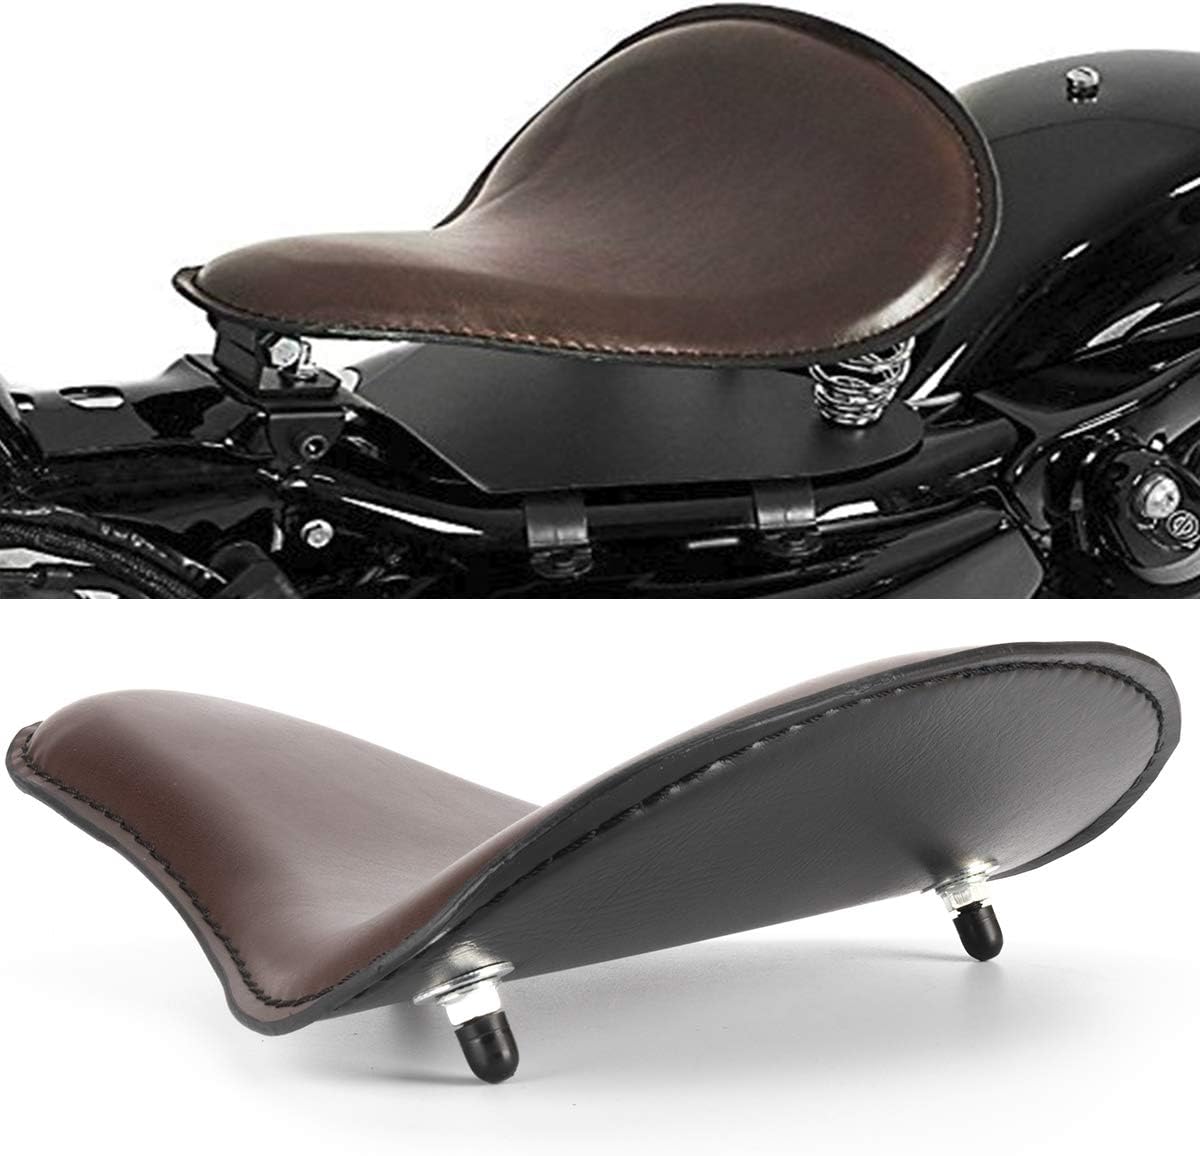 LKV 13.38 Motorcycle Solo Driver Seat Leather Cushion with Seatbase Spring Bracket Kits Replacement for Harley Davidson Sportster XL 1200 883 48 Chopper Bobber Seats Custom - LKV 13.38" Motorcycle Solo Driver Seat Leather Cushion Review